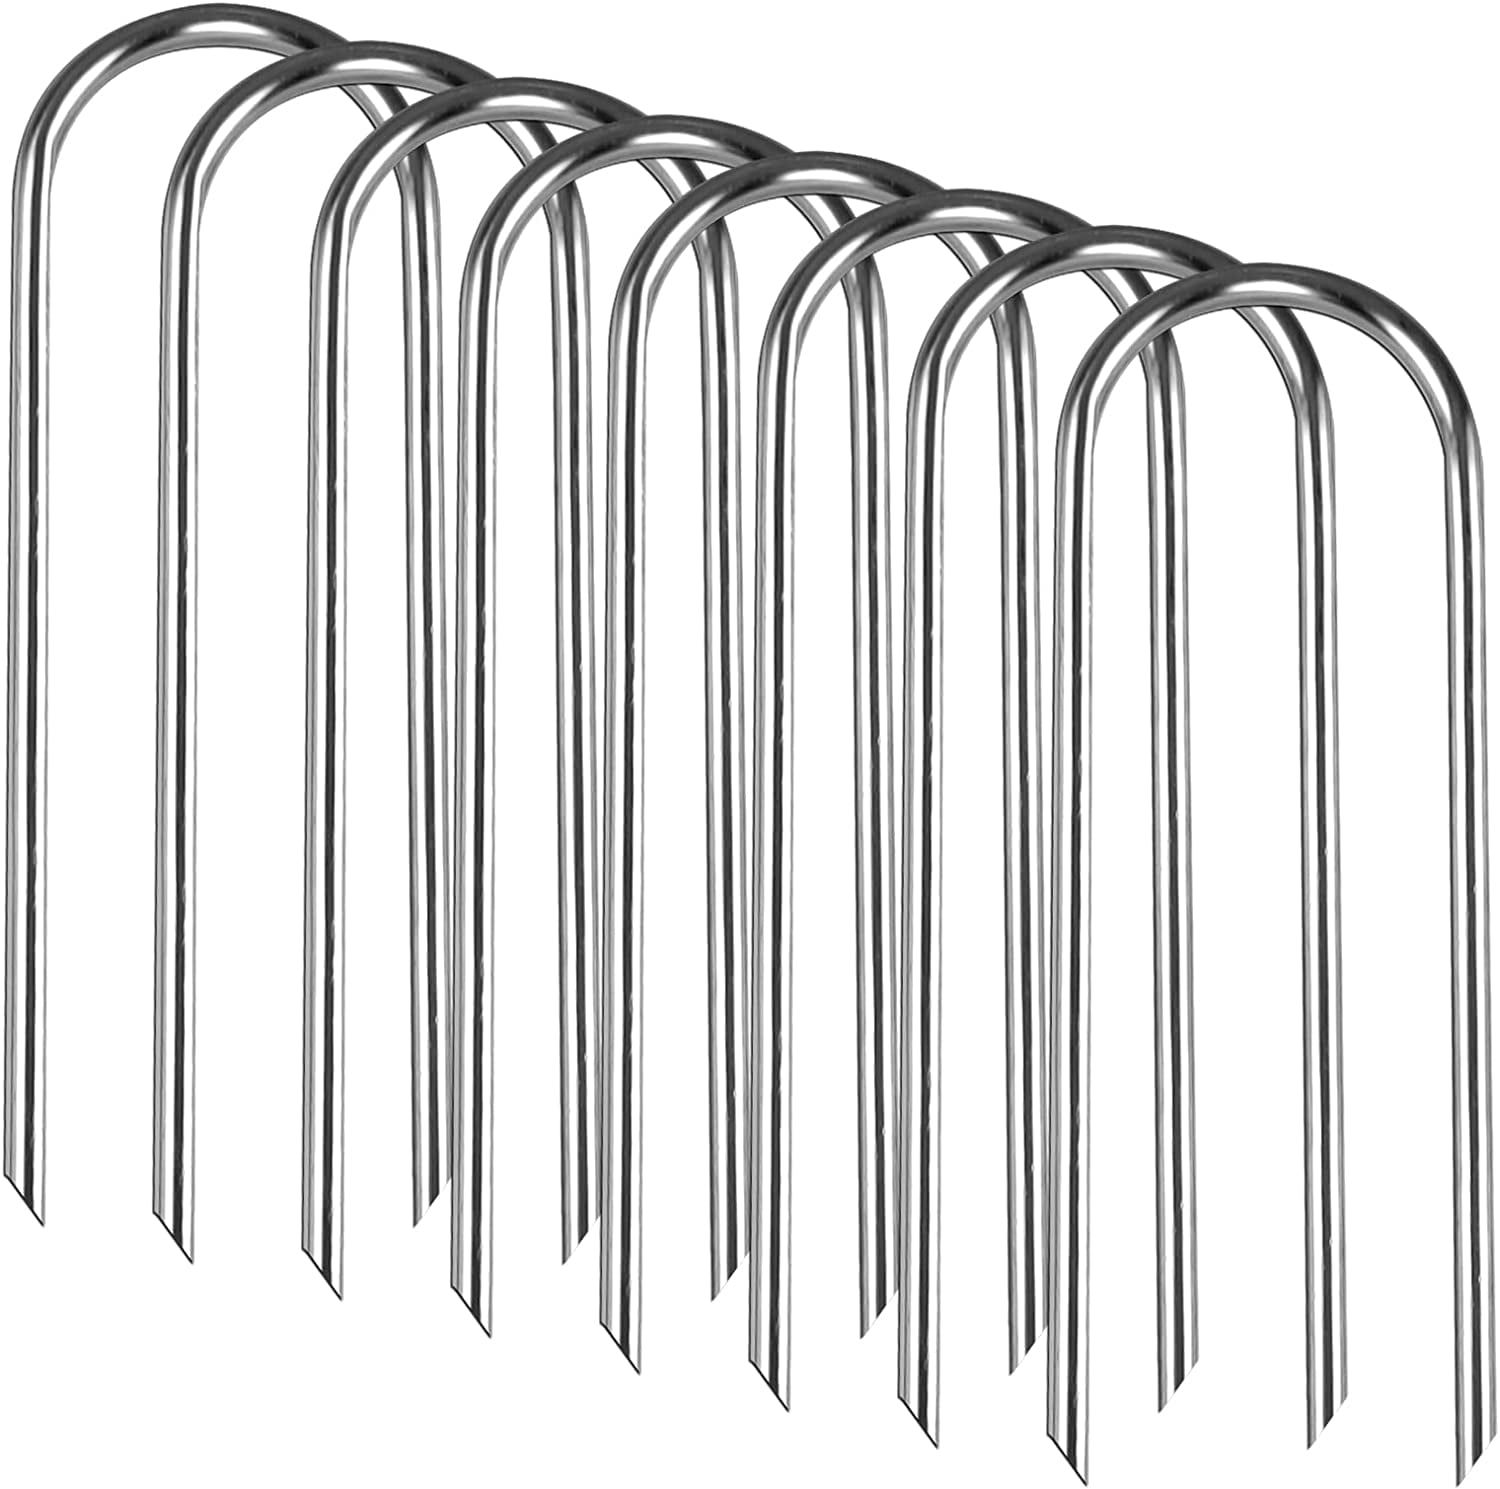 J Hook Rebar Stakes 12 Inch (20 Pack) - Camping Stakes Heavy Duty - Heavy  Duty Rebar Stakes for Chainlink Fence, Sports nets, Camping, Trampolines